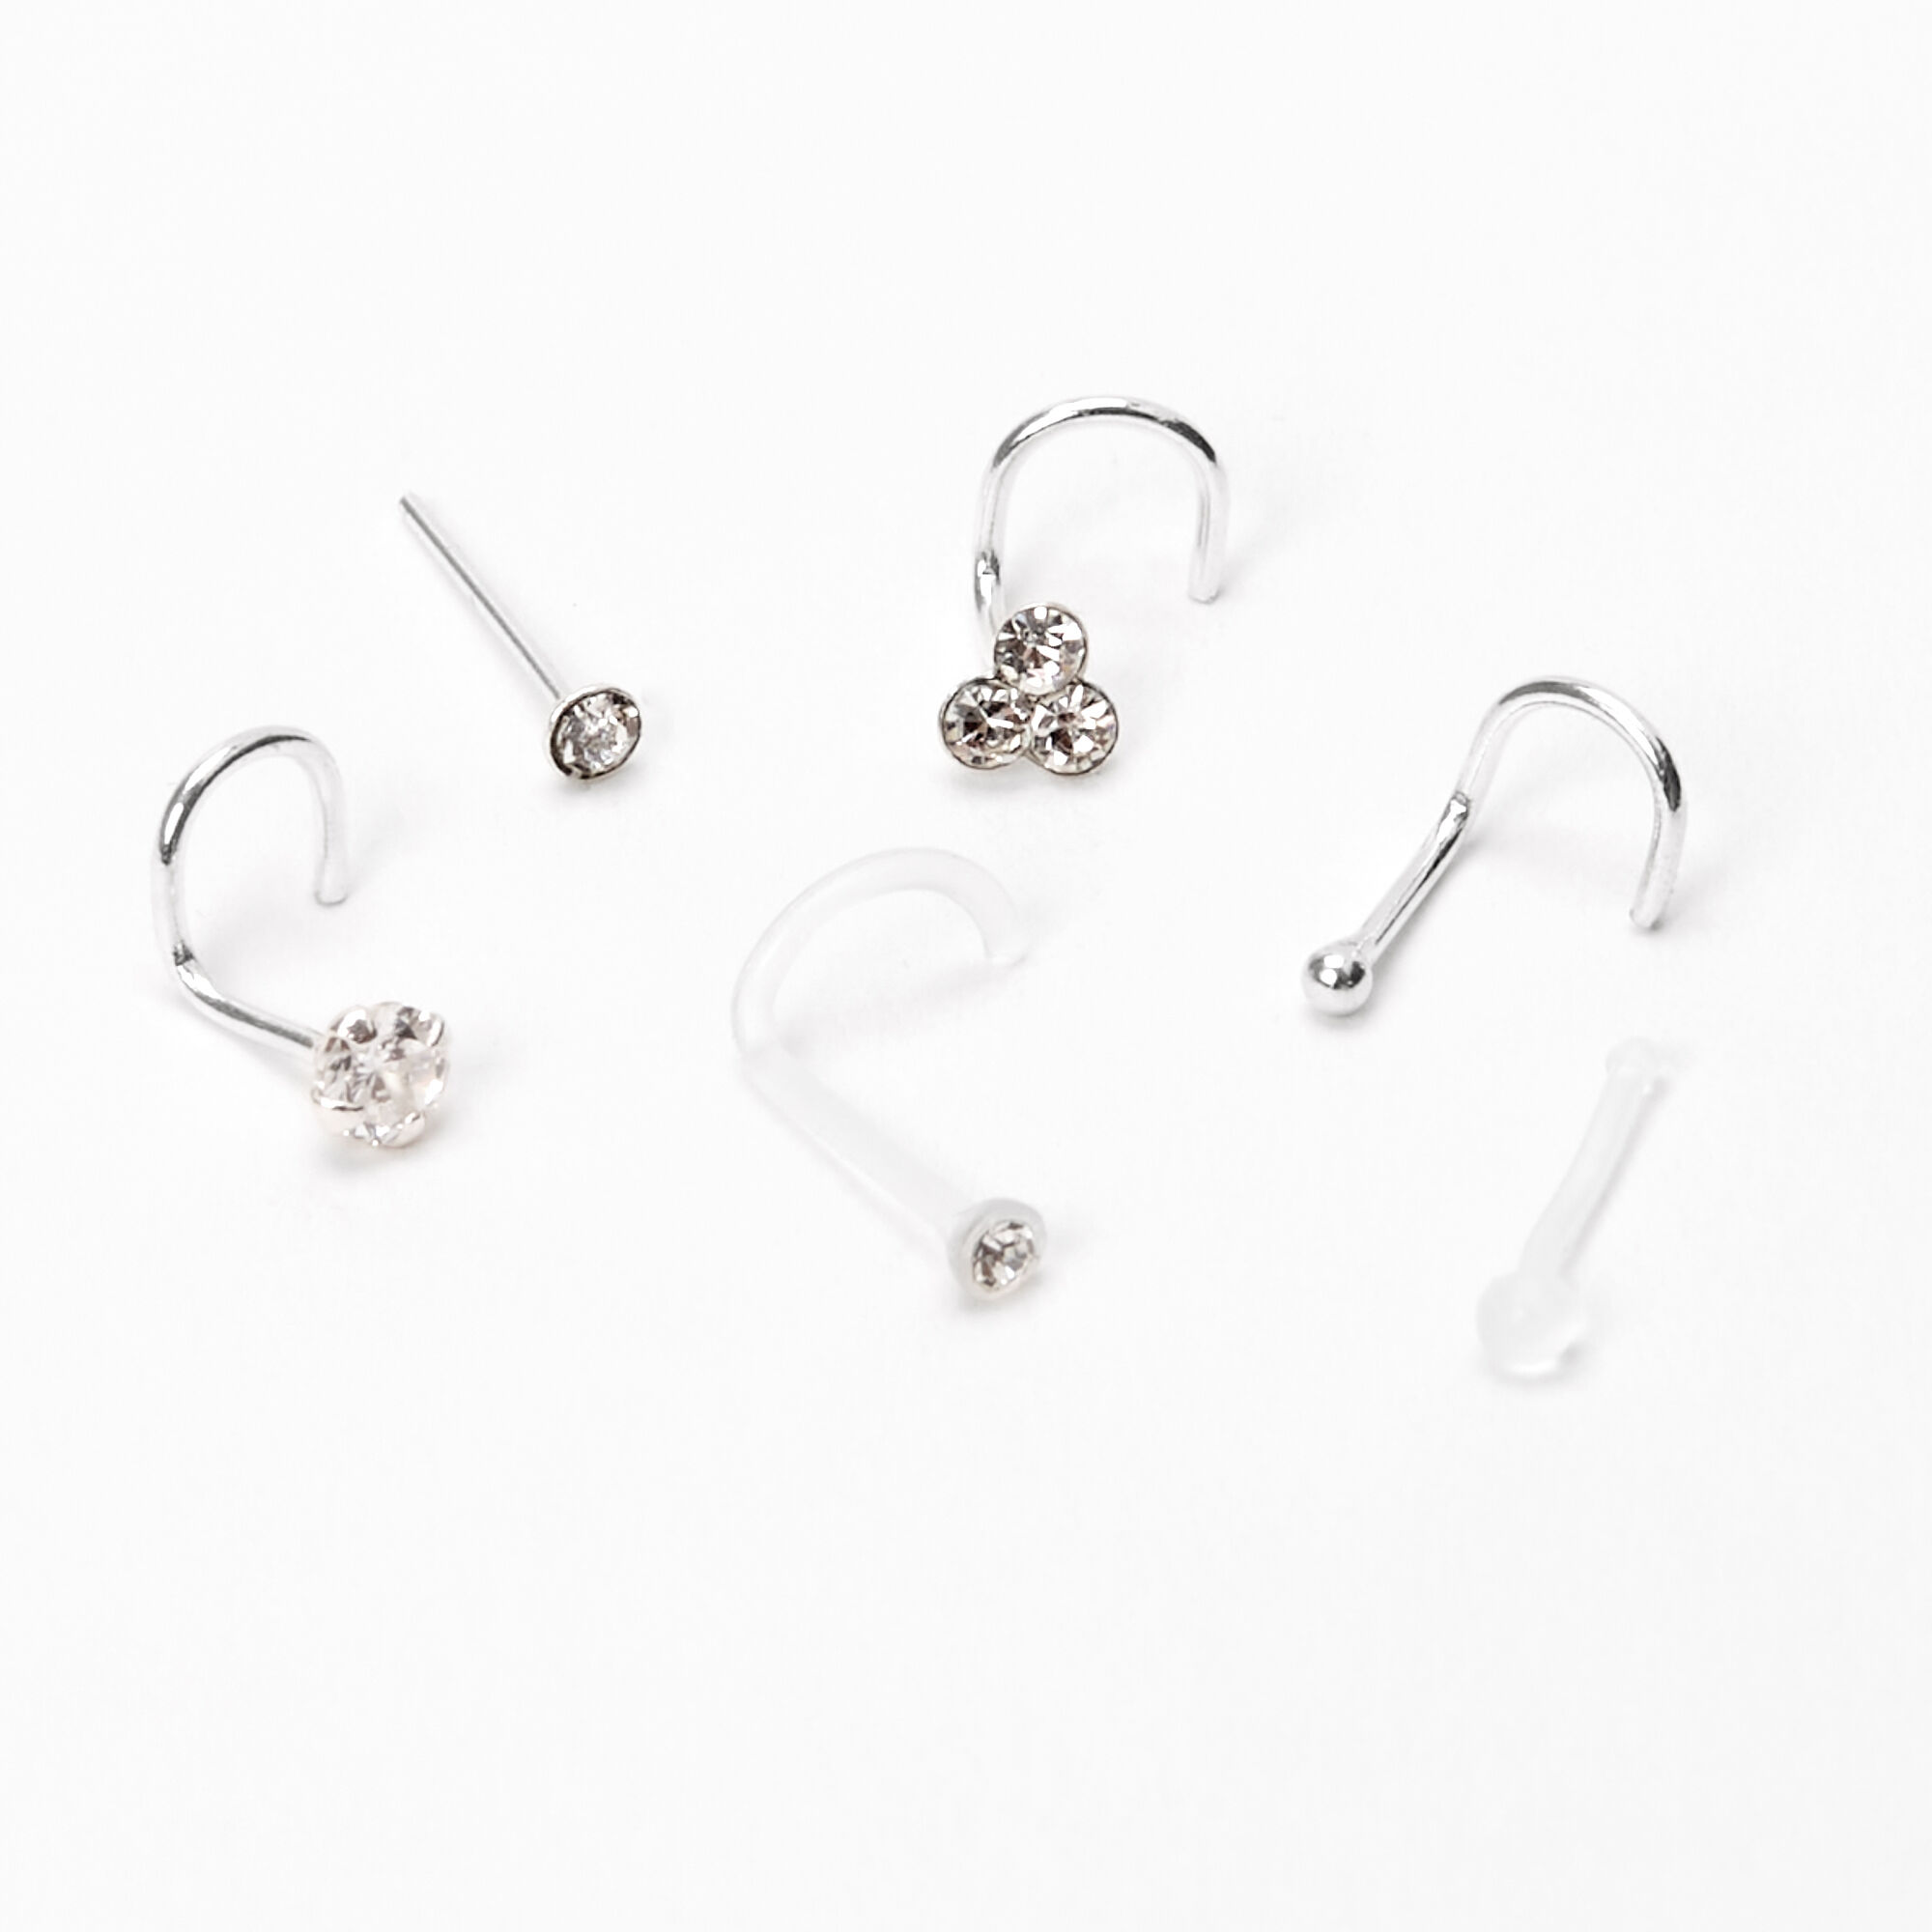 View Claires Tone 20G Star Heart Mixed Nose Rings 6 Pack Silver information